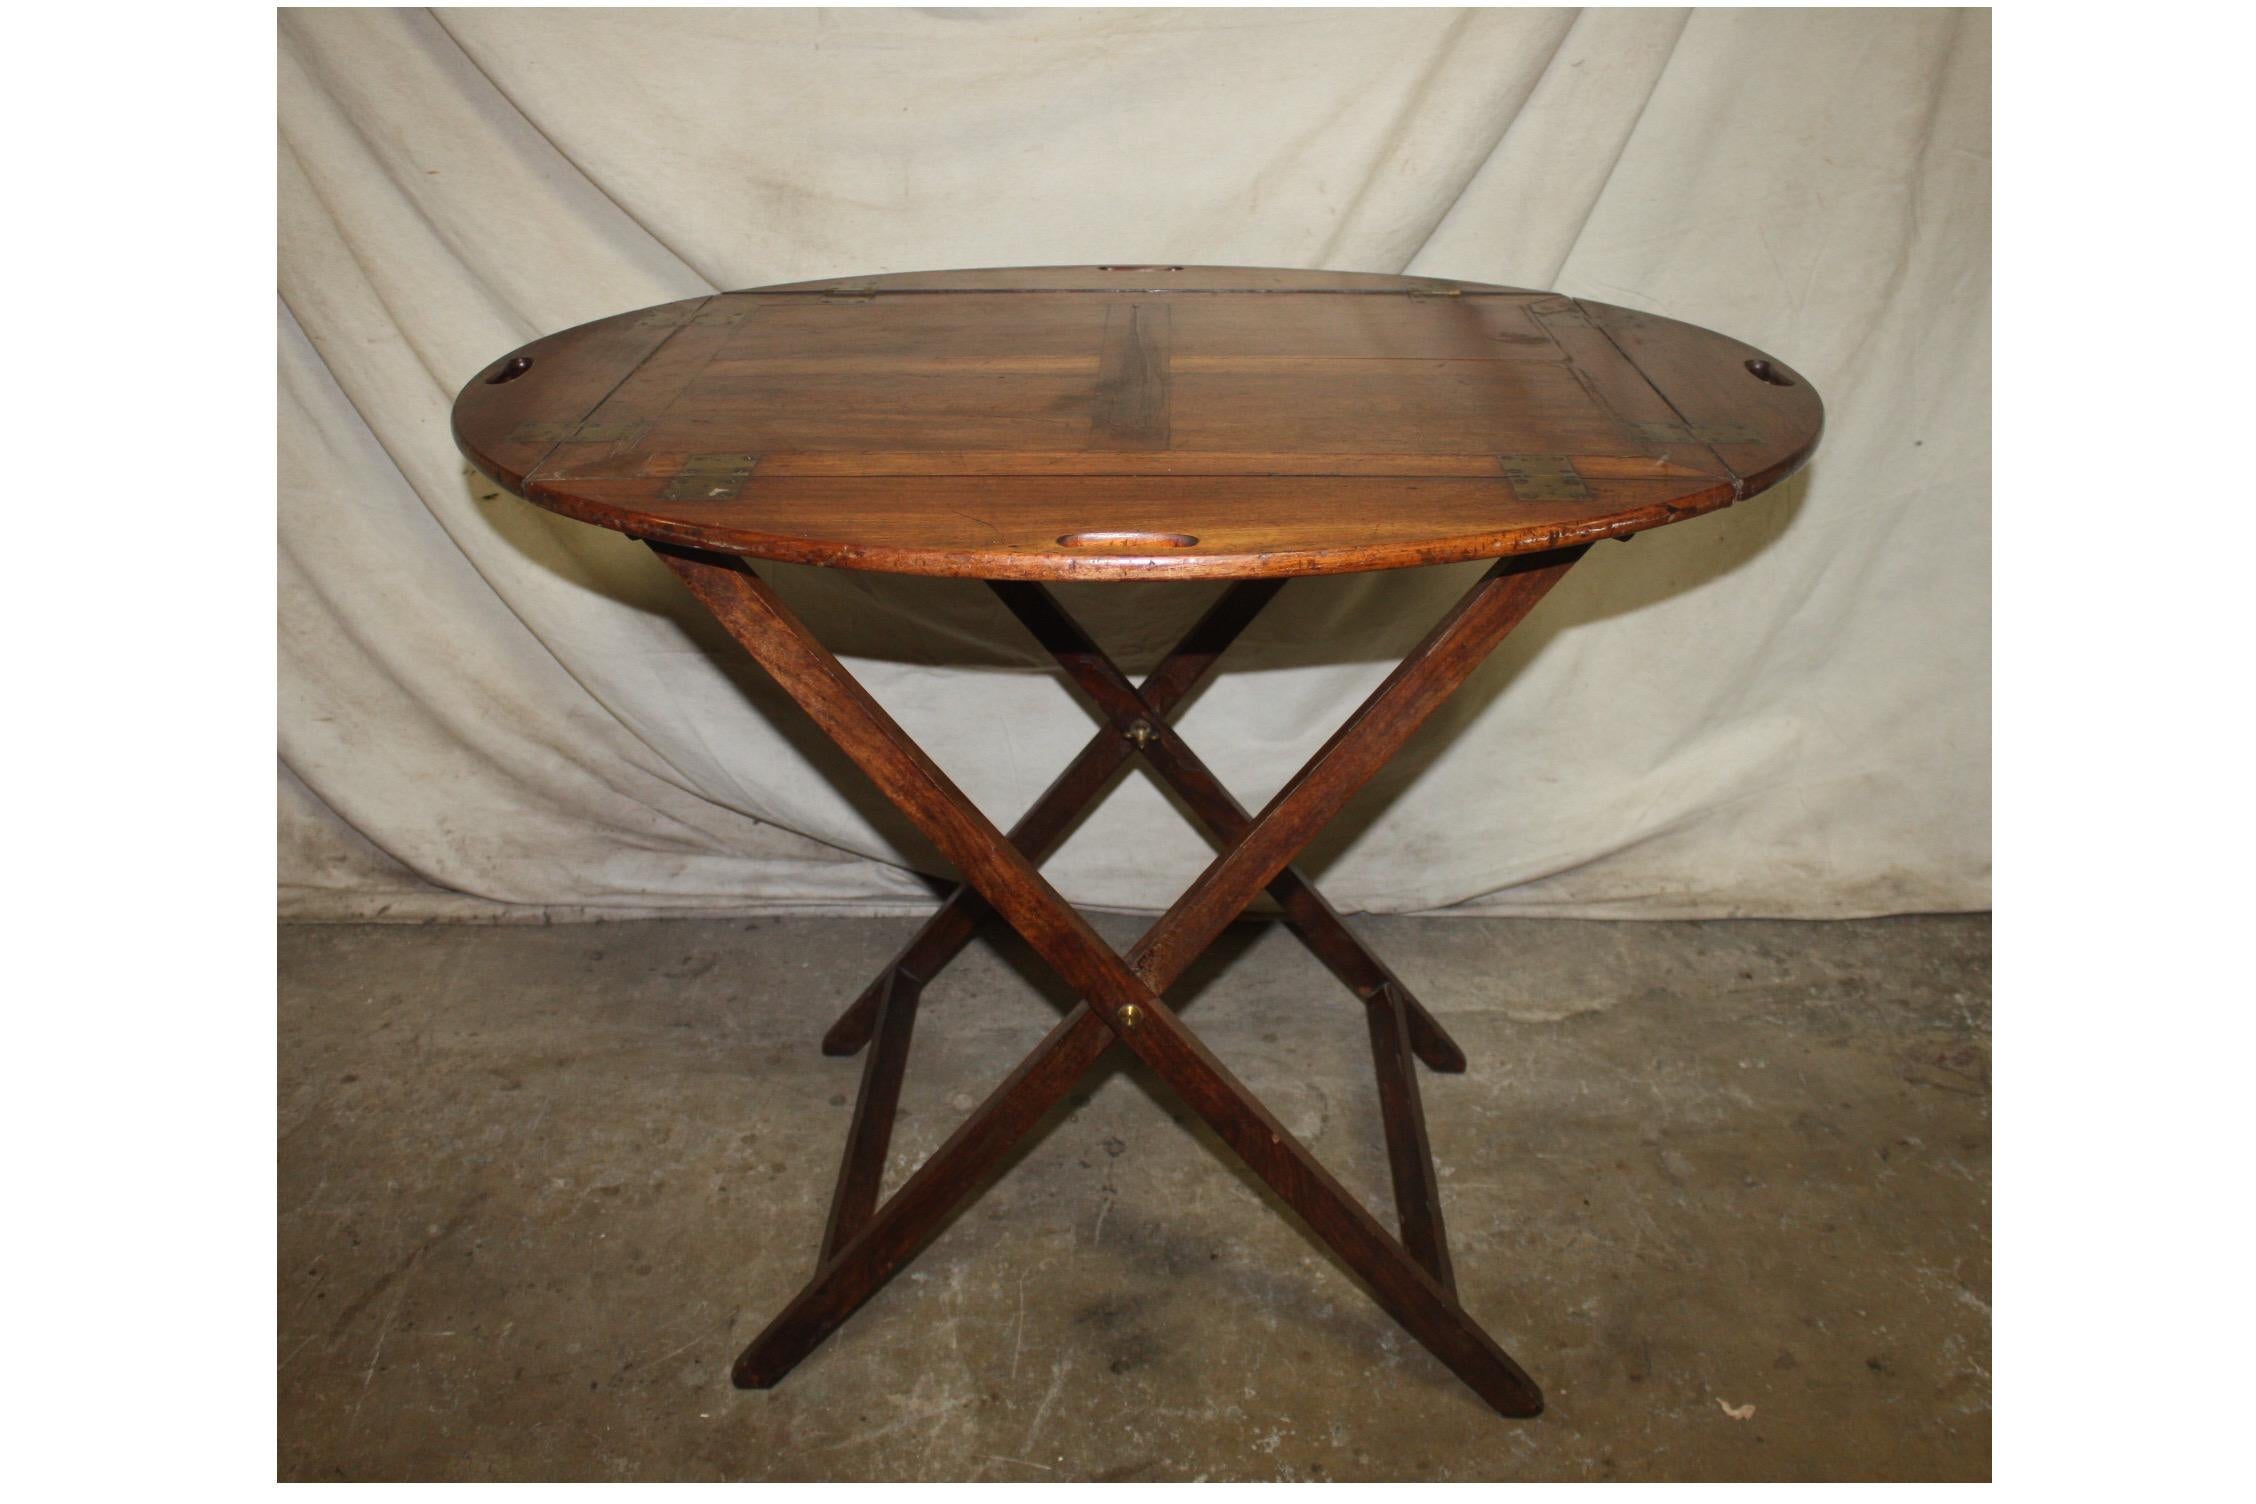 19th century french boat table.